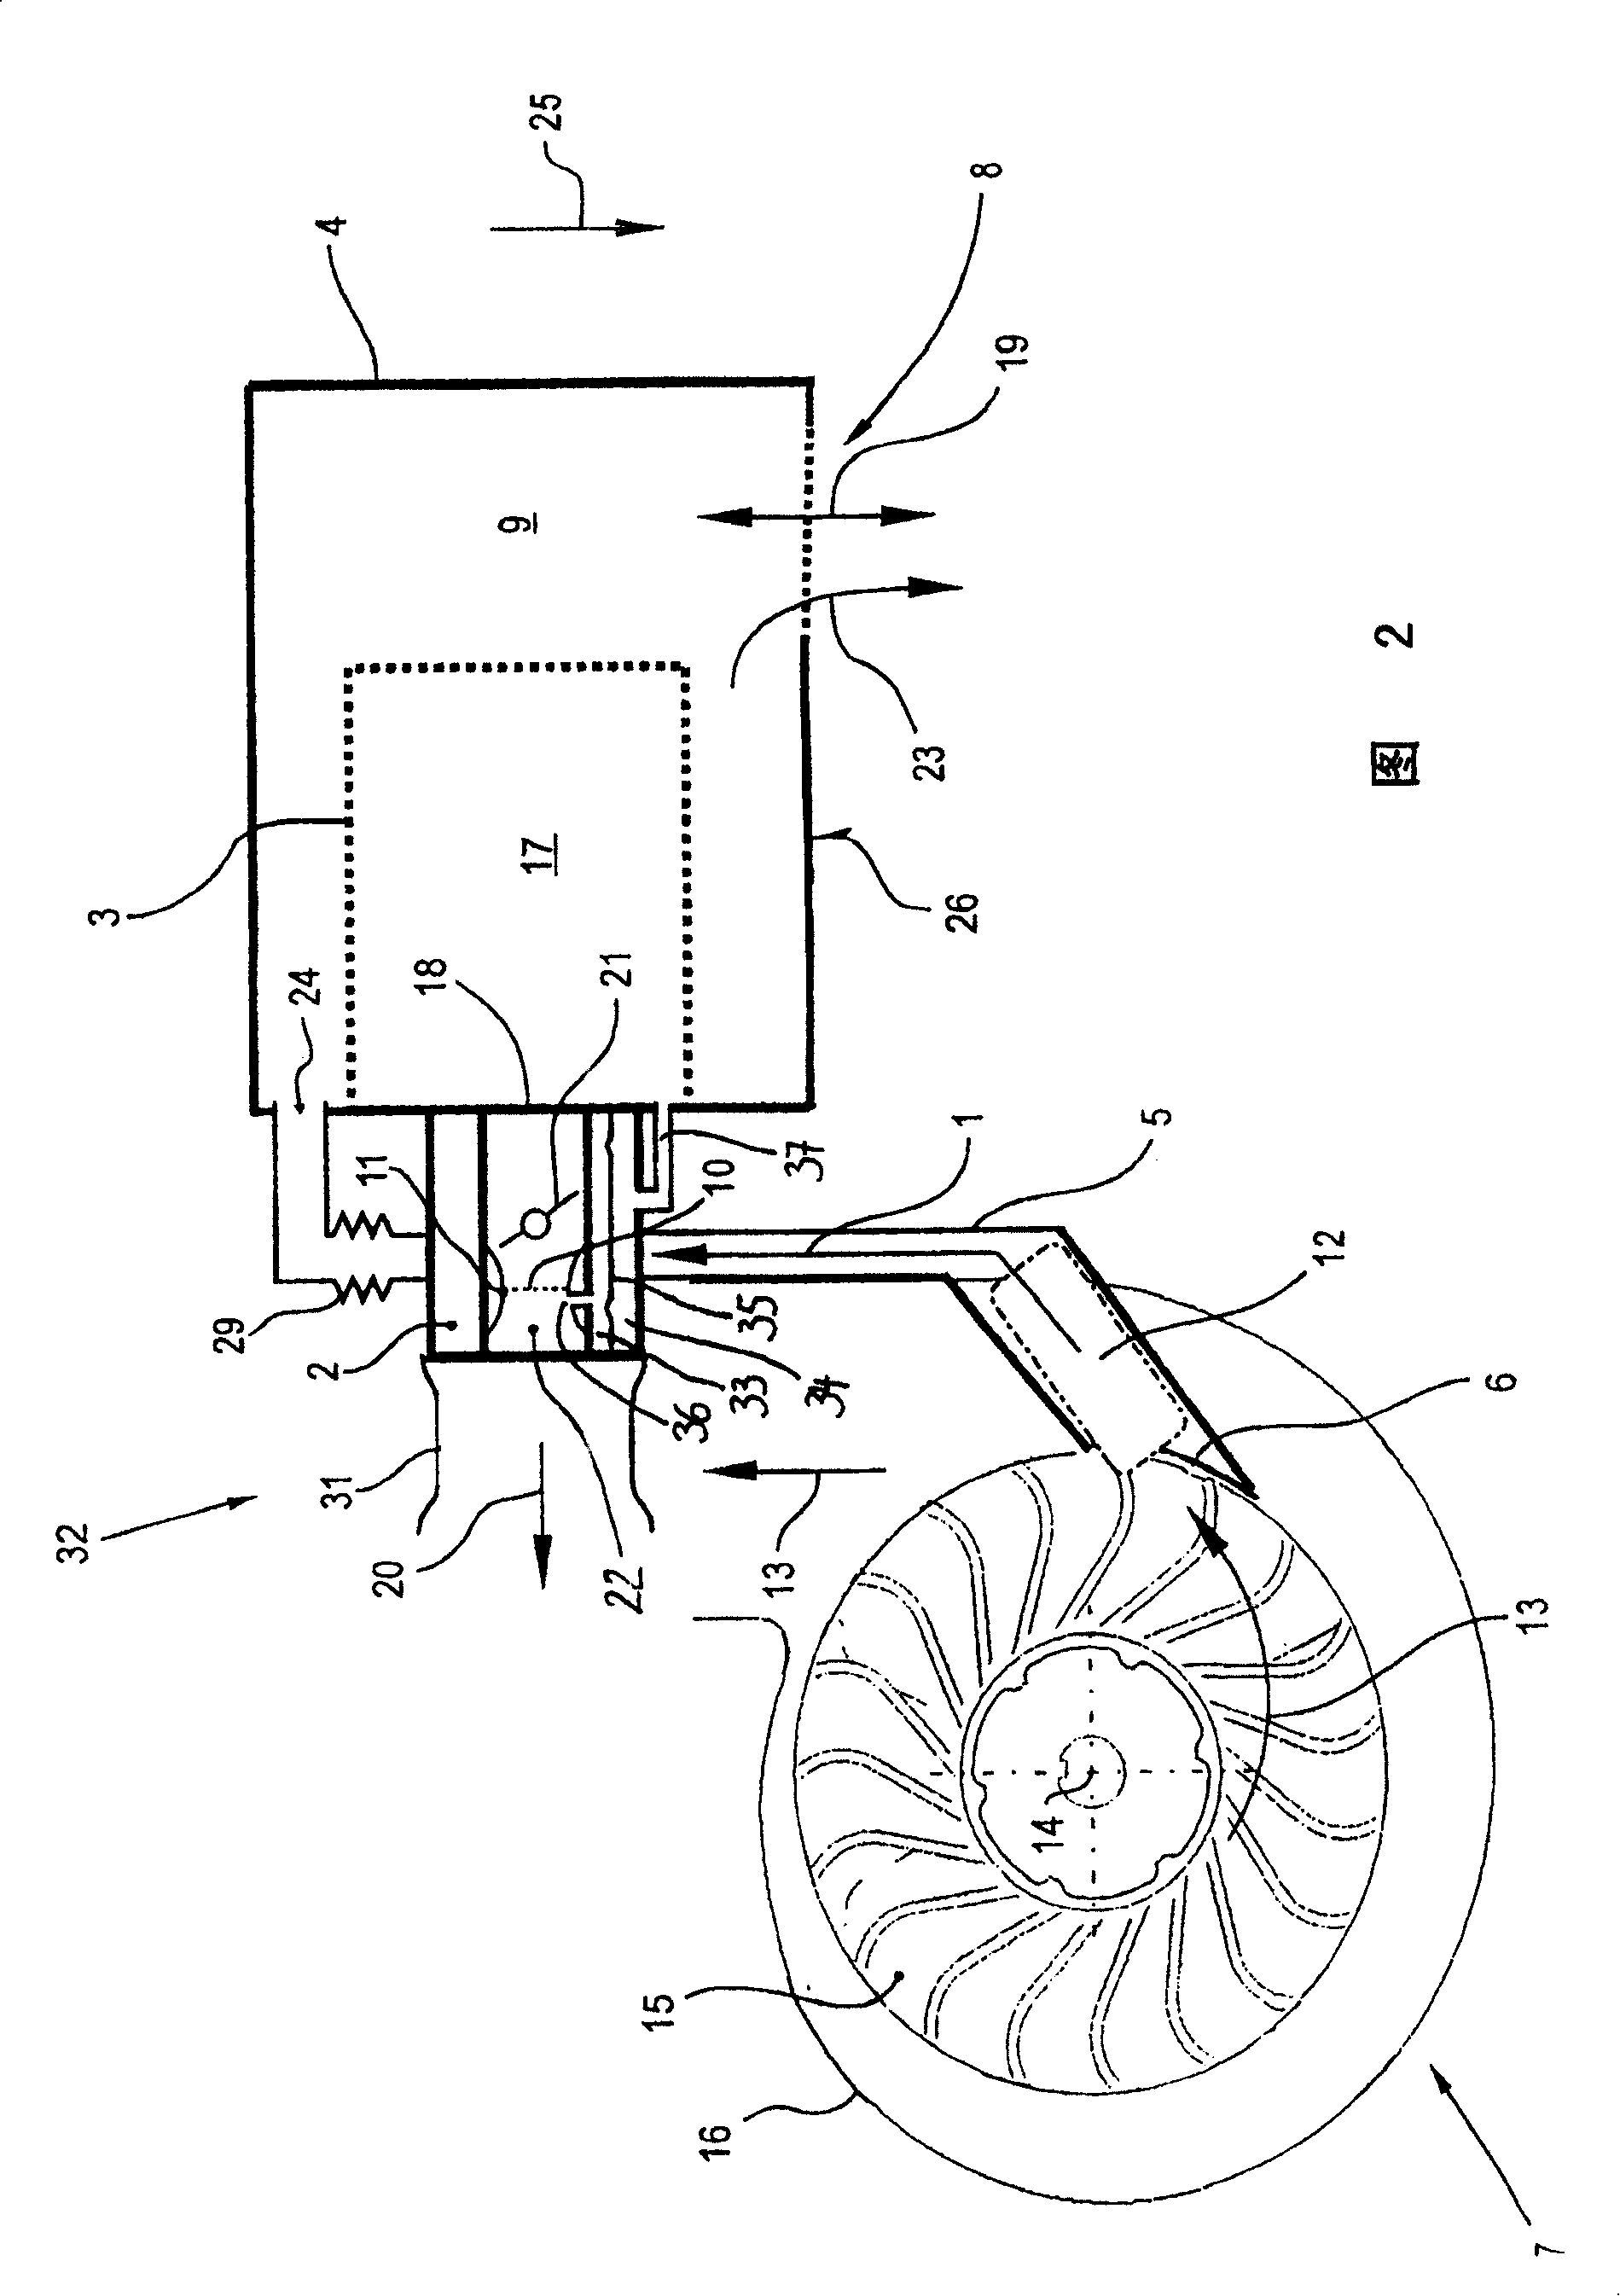 Intake system for internal-combustion engine of hand-hold work tool